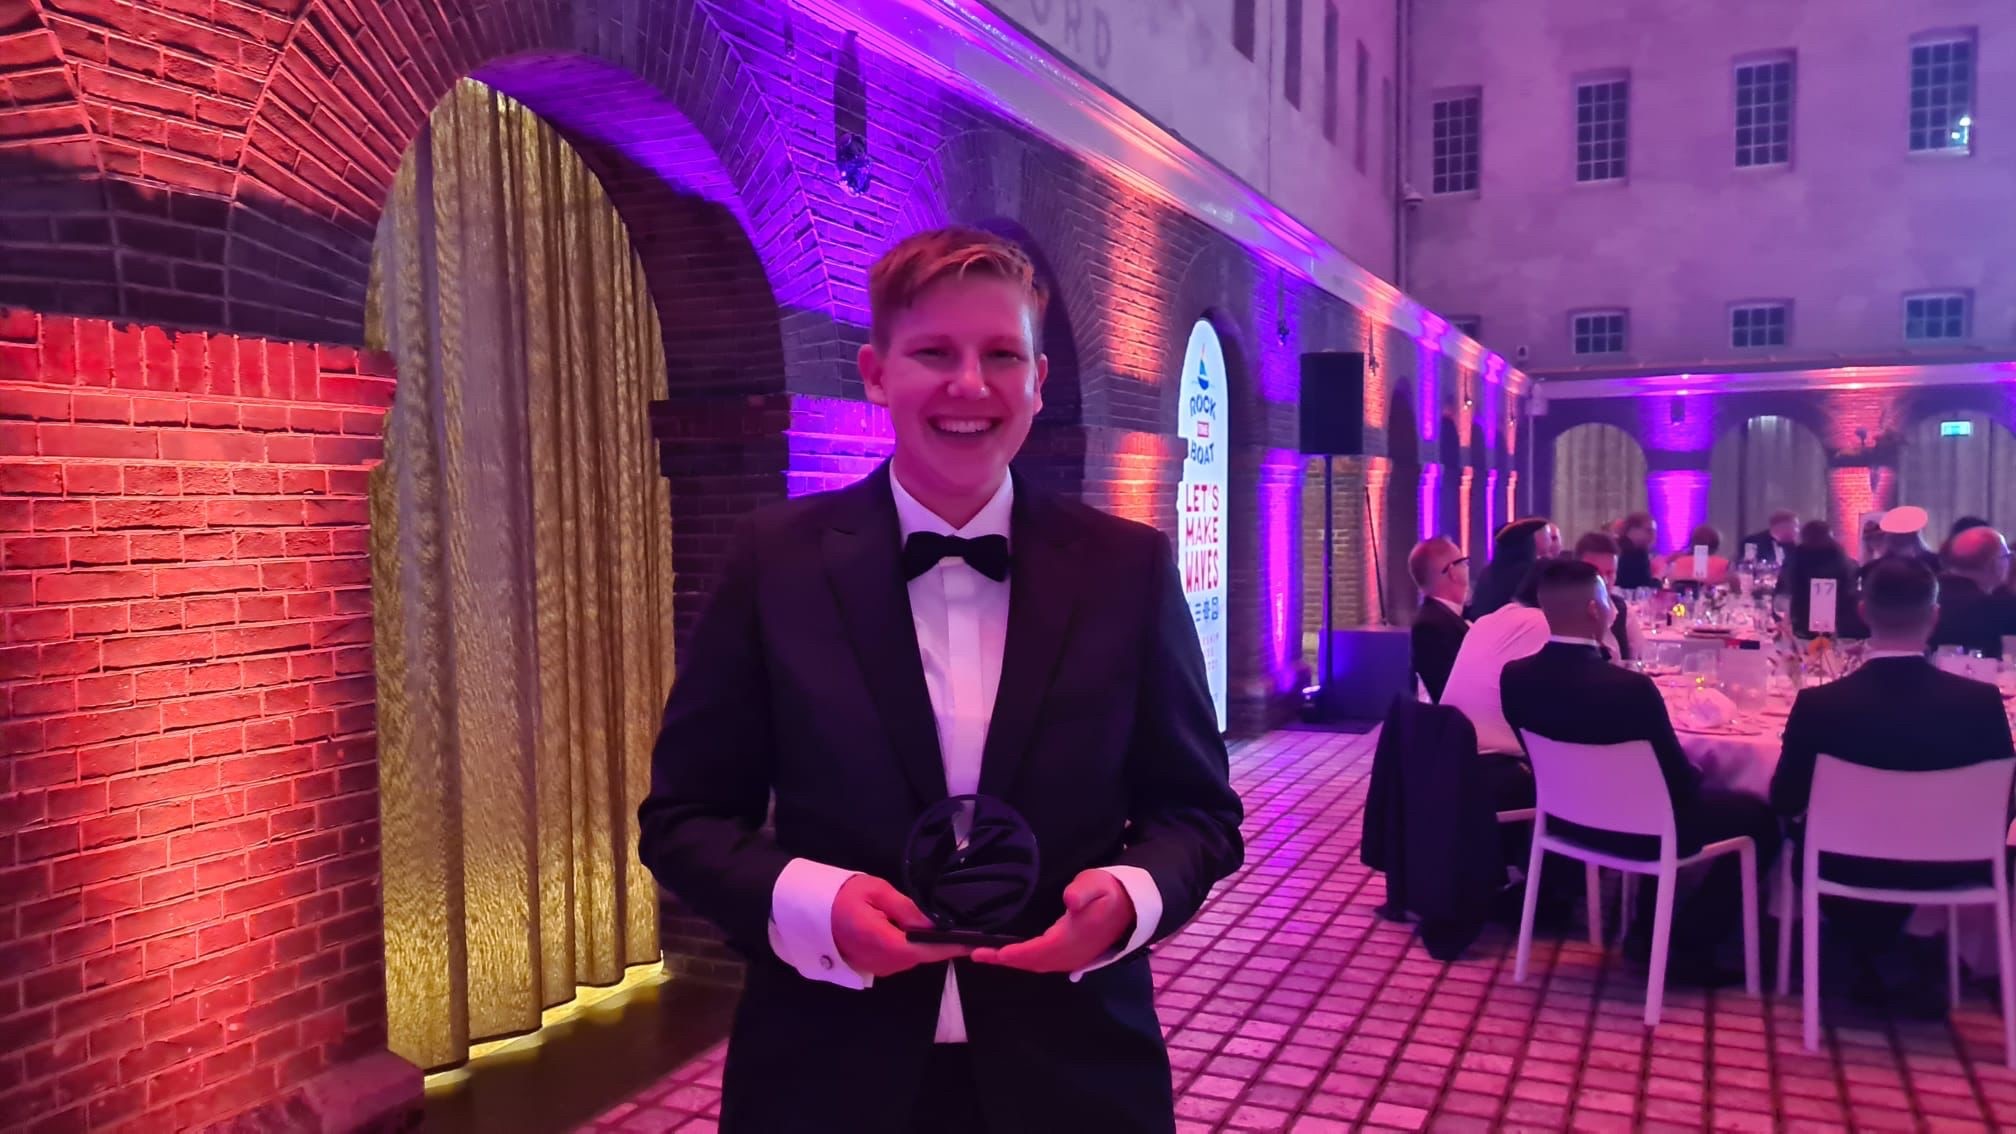 Maxim Buise, a lead of Aegon Proud's global network: “I’m very proud of Aegon’s continuous growth and was pleased that we were able to retain our status as a leader in LGBTQIA+ inclusion."